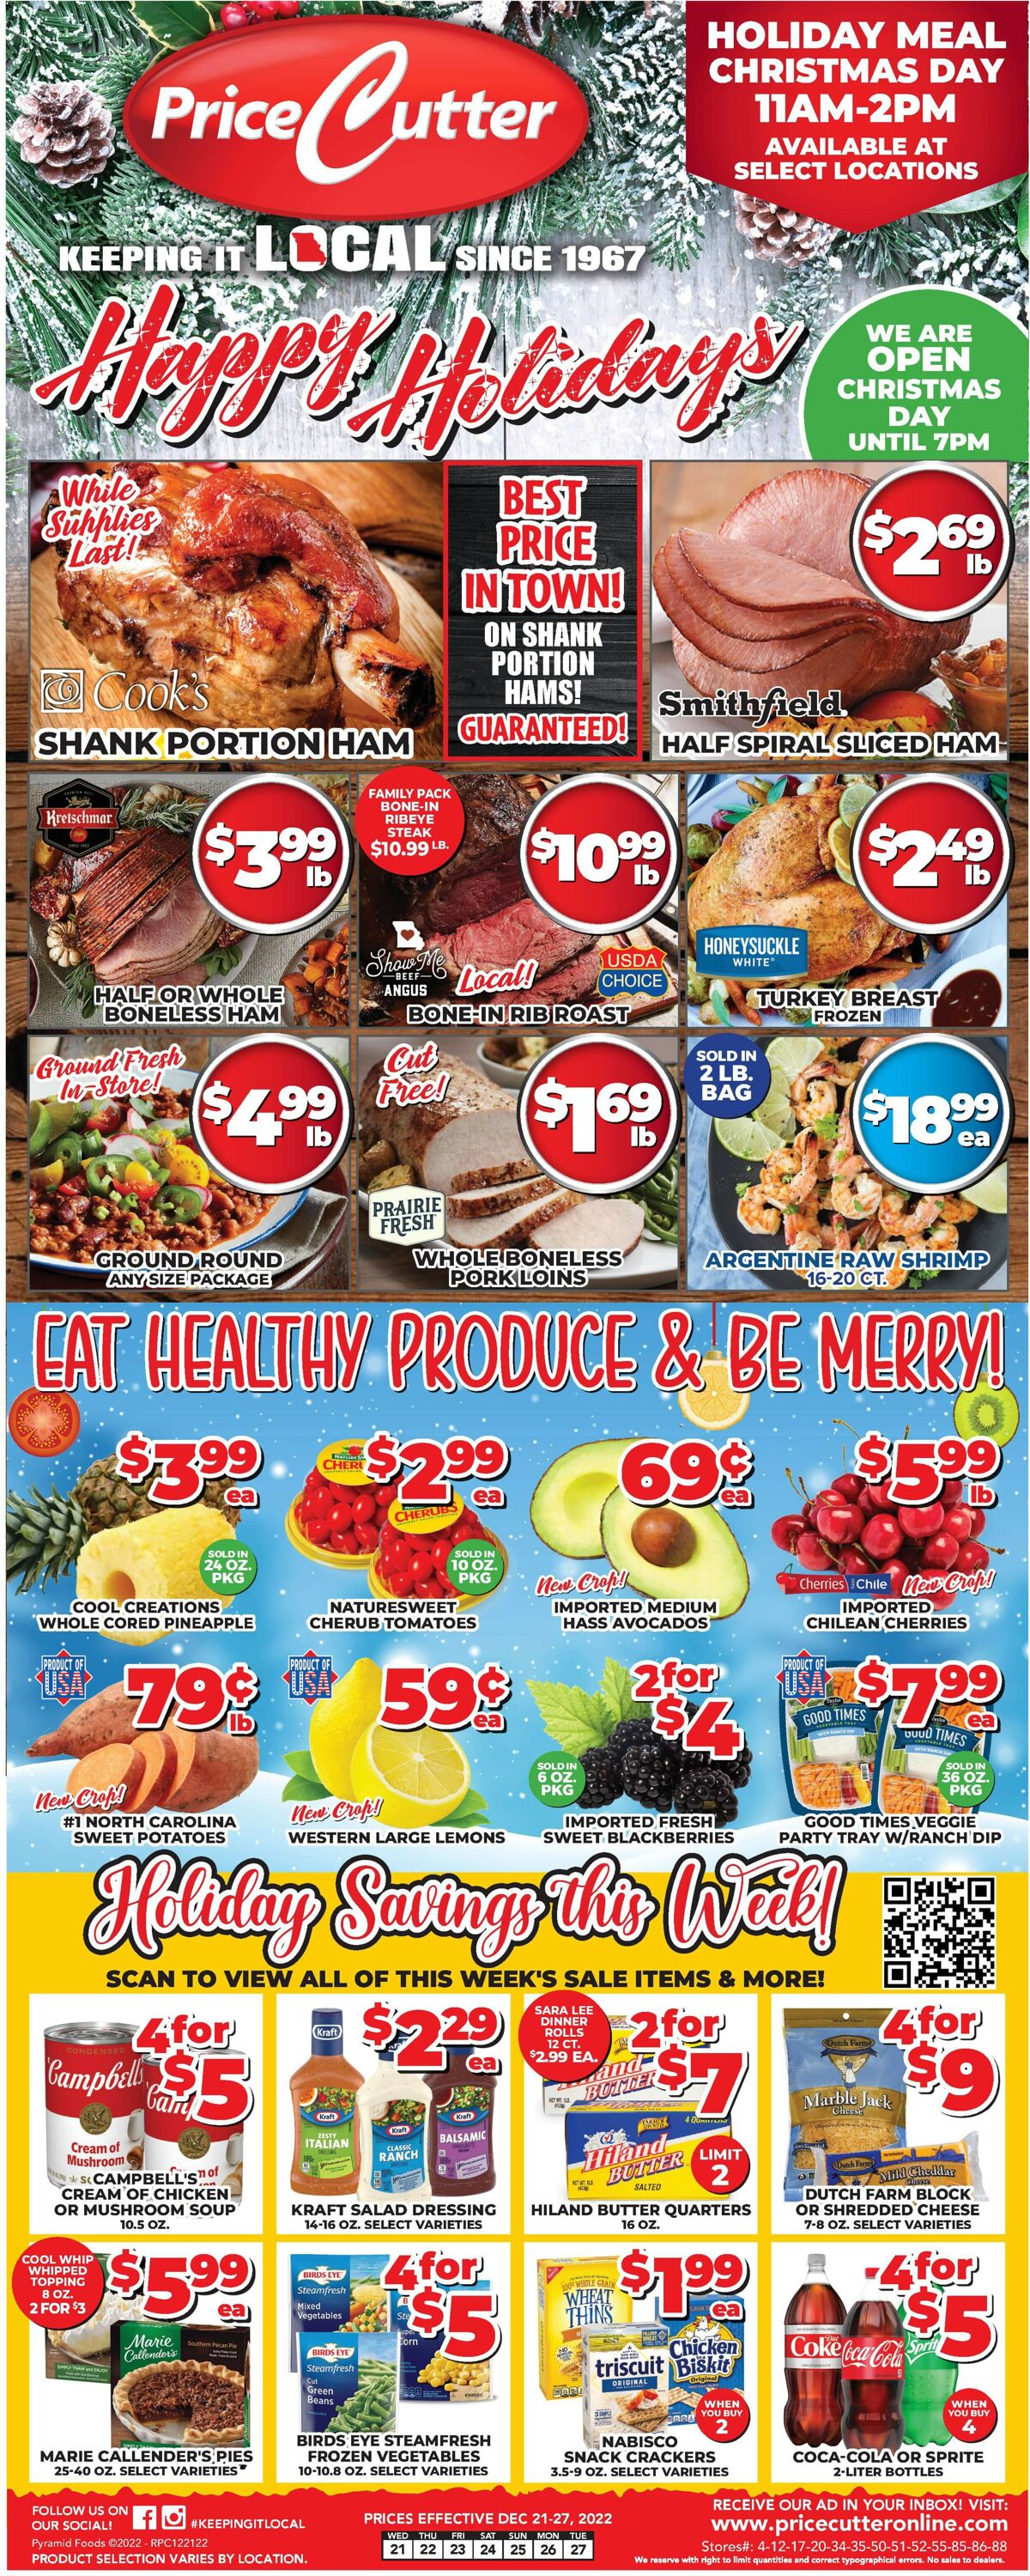 Price Cutter Weekly Ad Circular - valid 12/21-12/27/2022